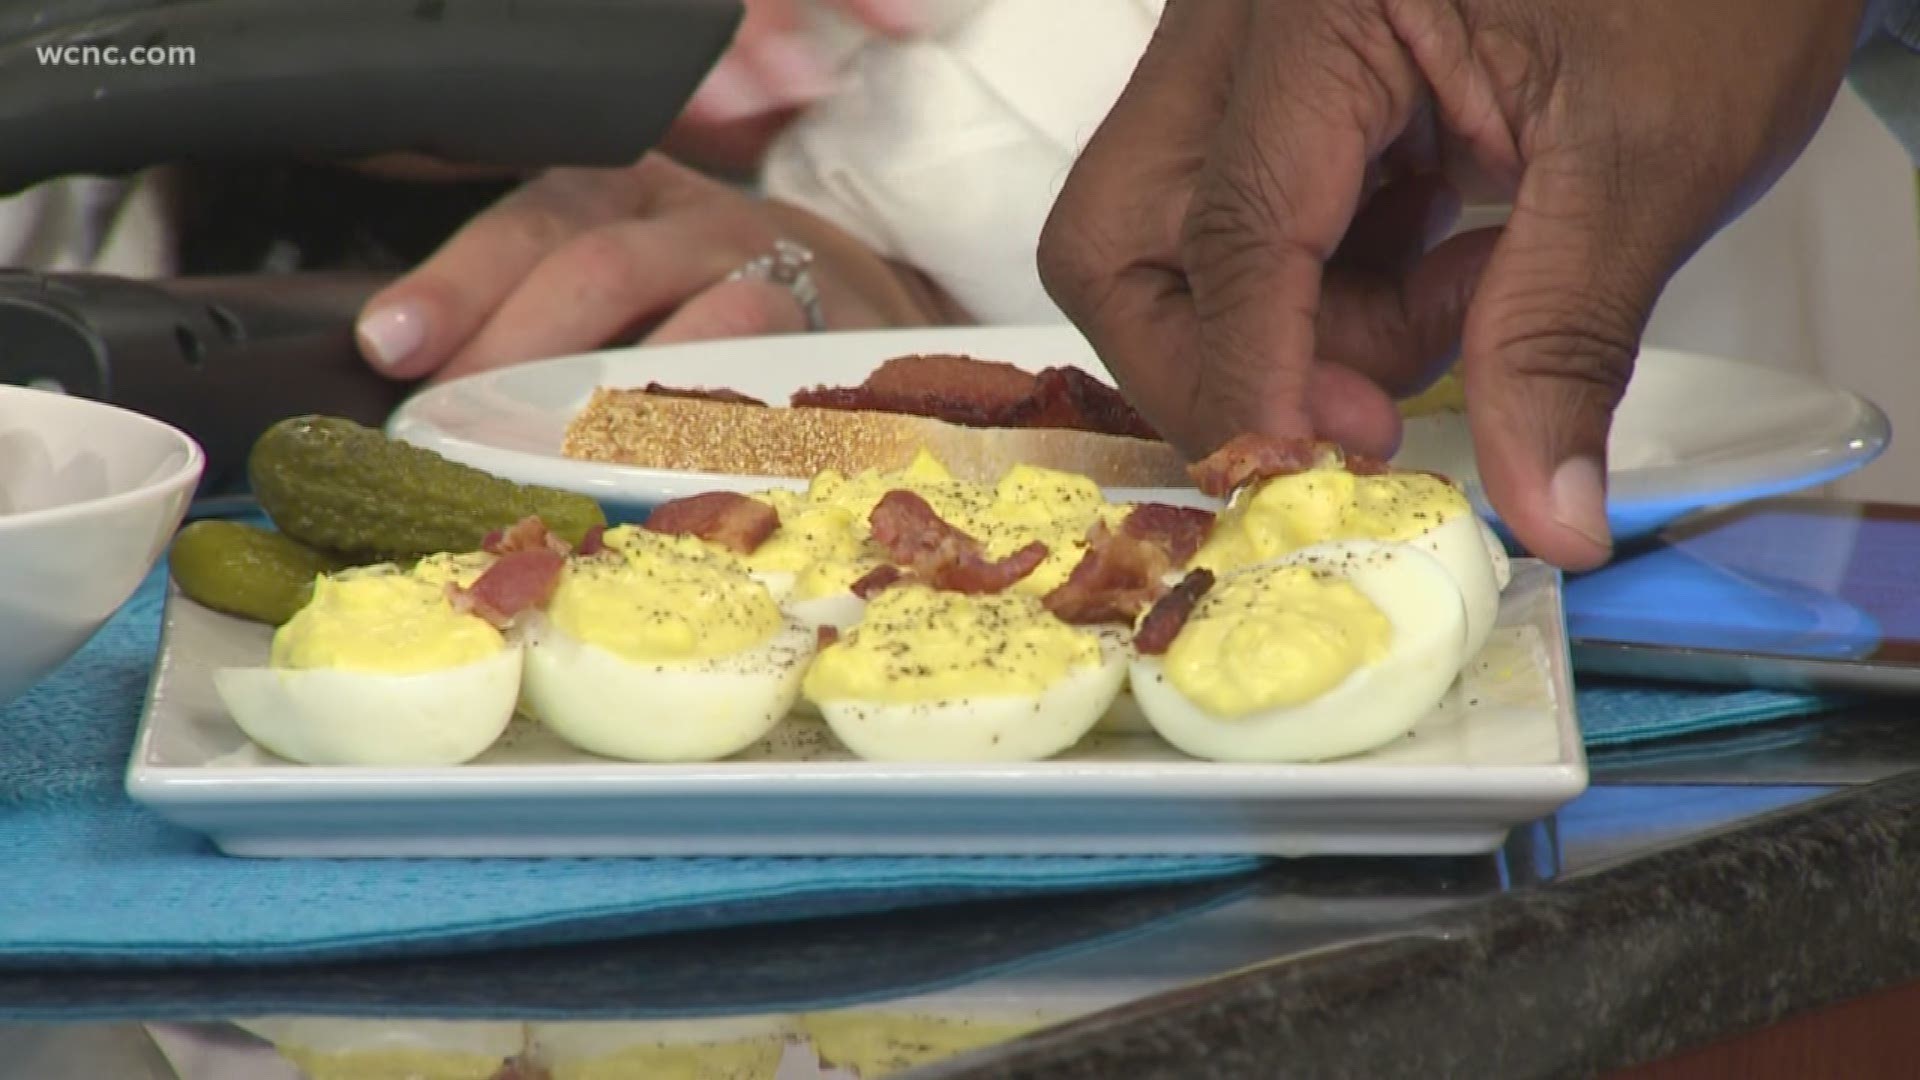 Now that Easter is over, you may have left over hard boiled eggs. Becky Justice shares three easy recipes you can make with those eggs so they don’t go to waste.